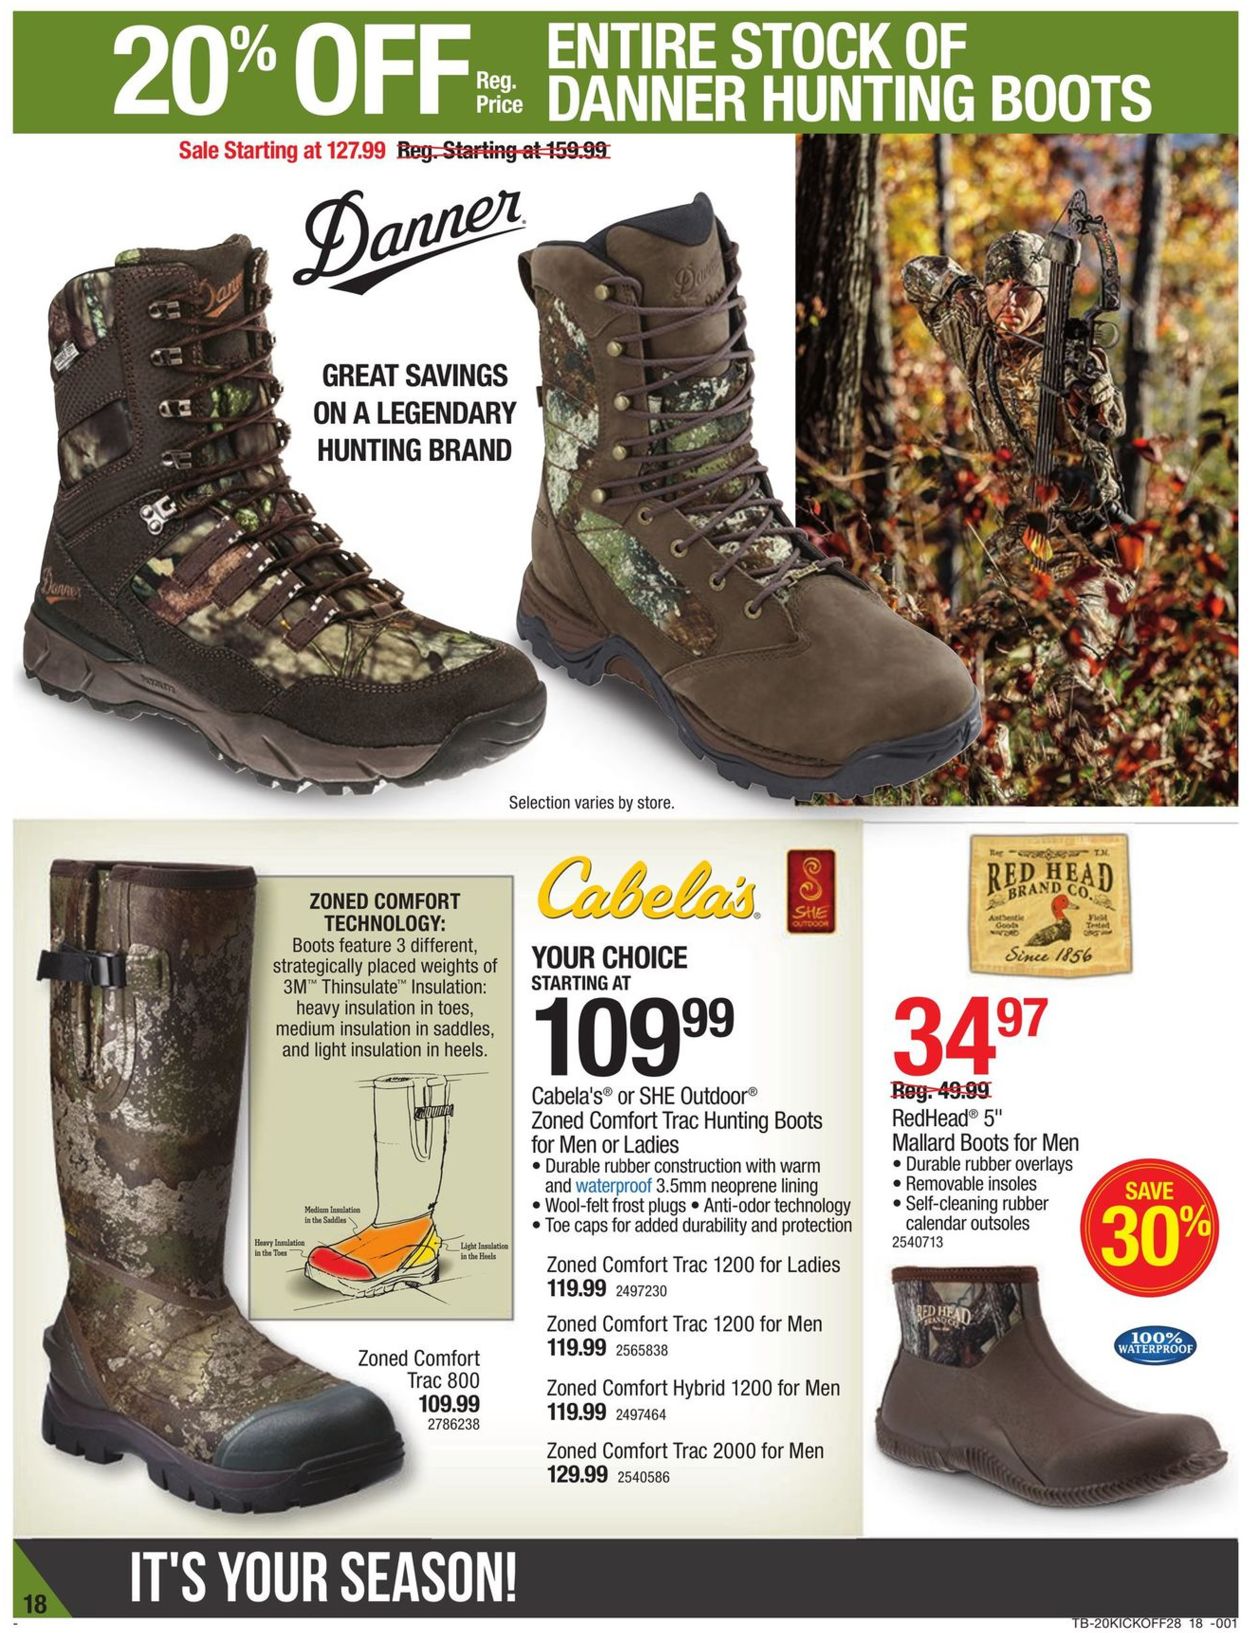 cabela's men's zoned comfort trac 2000 hunting boots